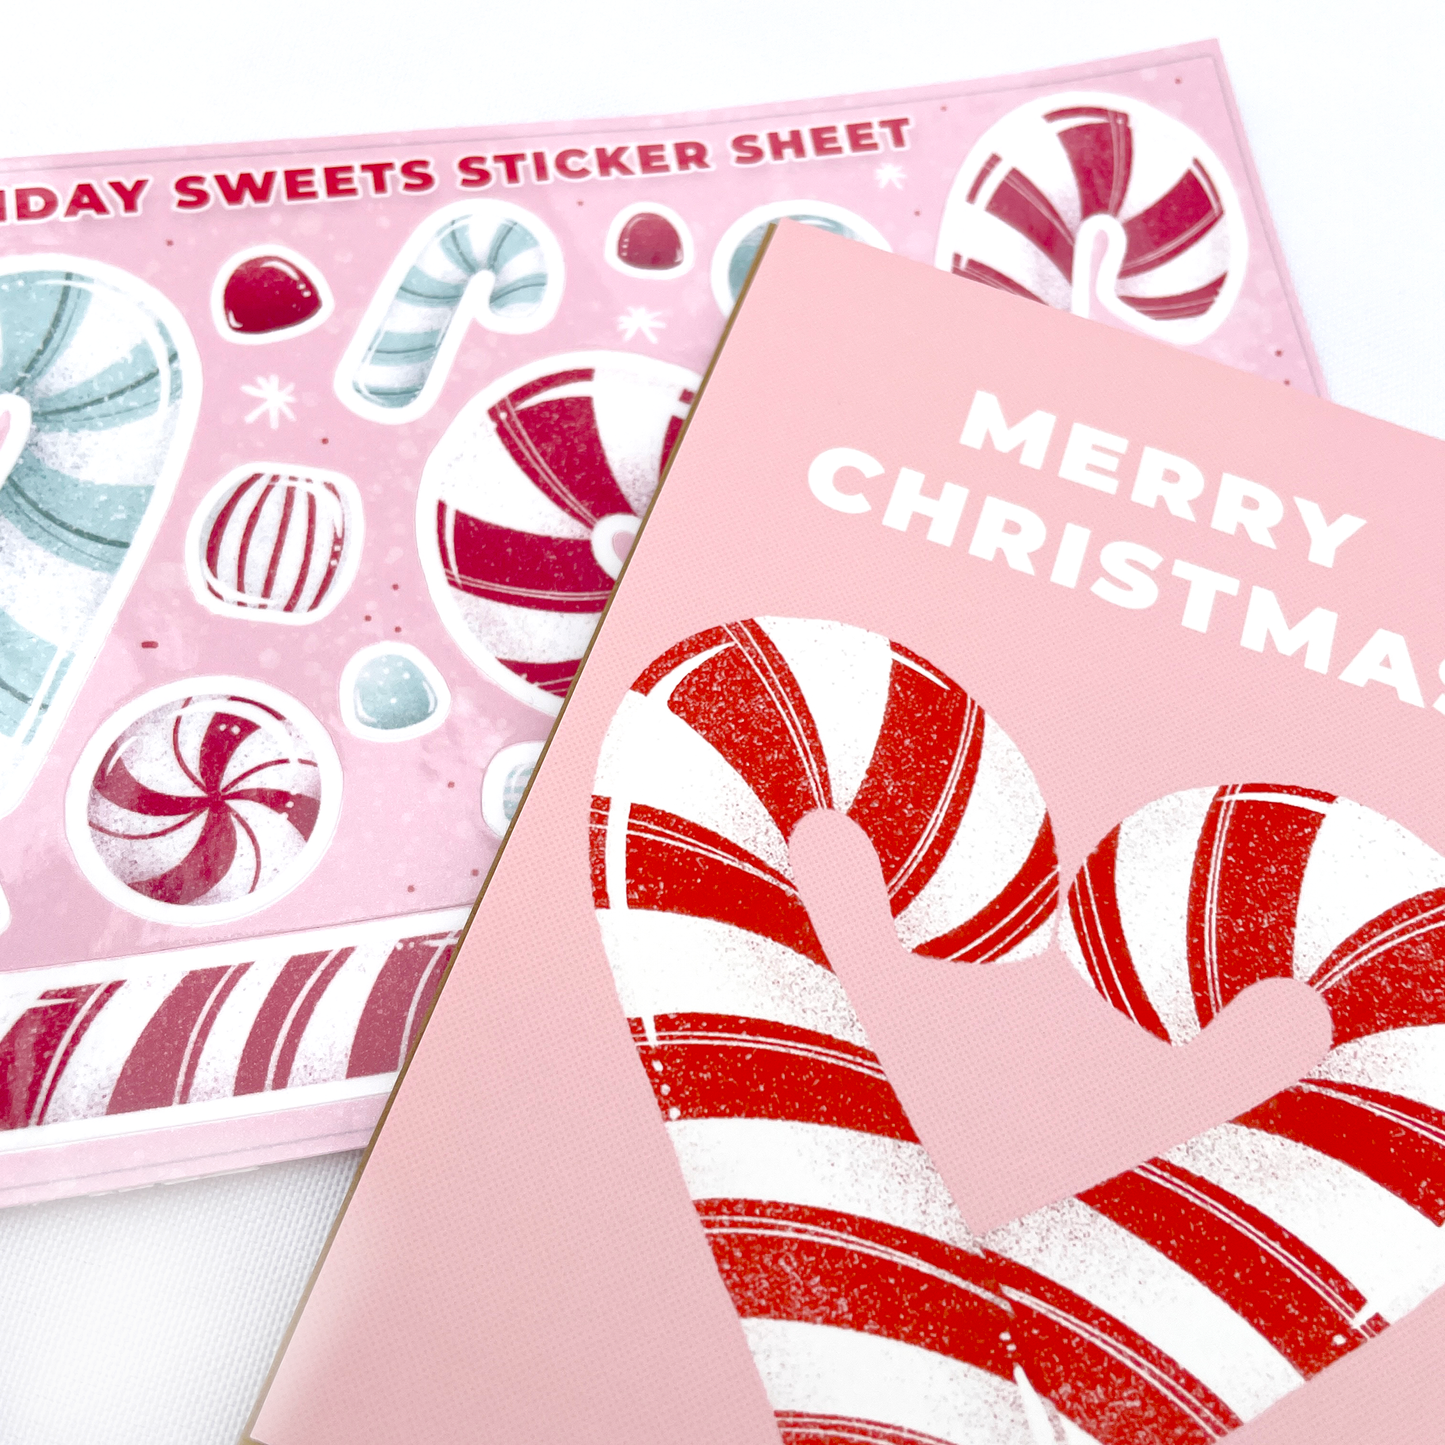 Holiday Sweets! (Notecard, Sticker, and Sticker Sheet)